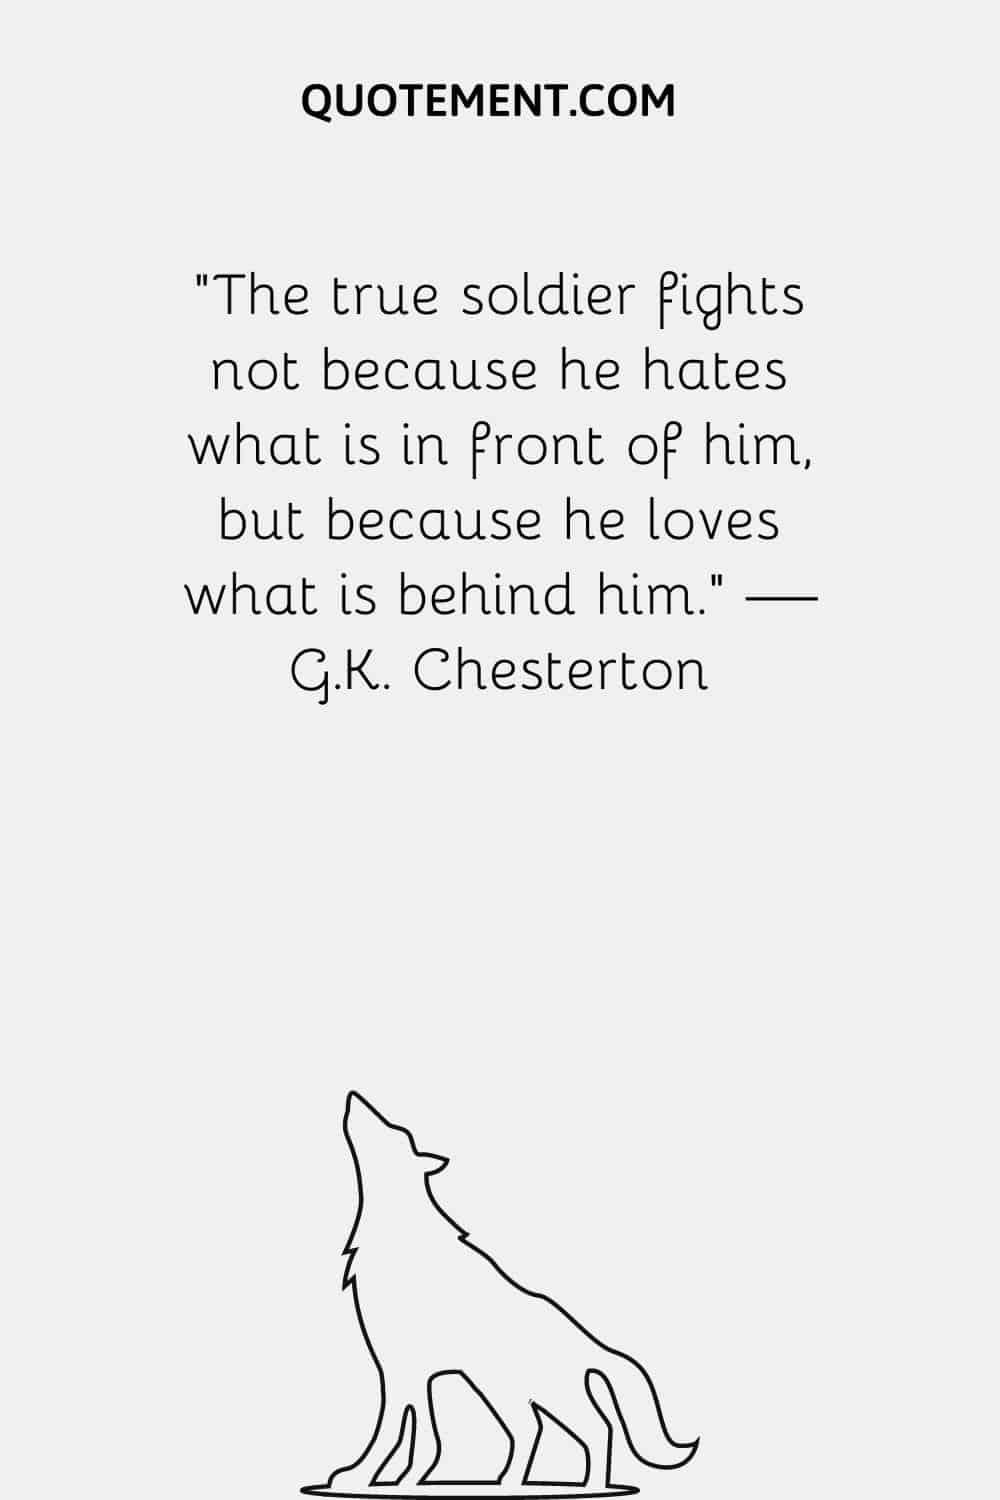 The true soldier fights not because he hates what is in front of him, but because he loves what is behind him